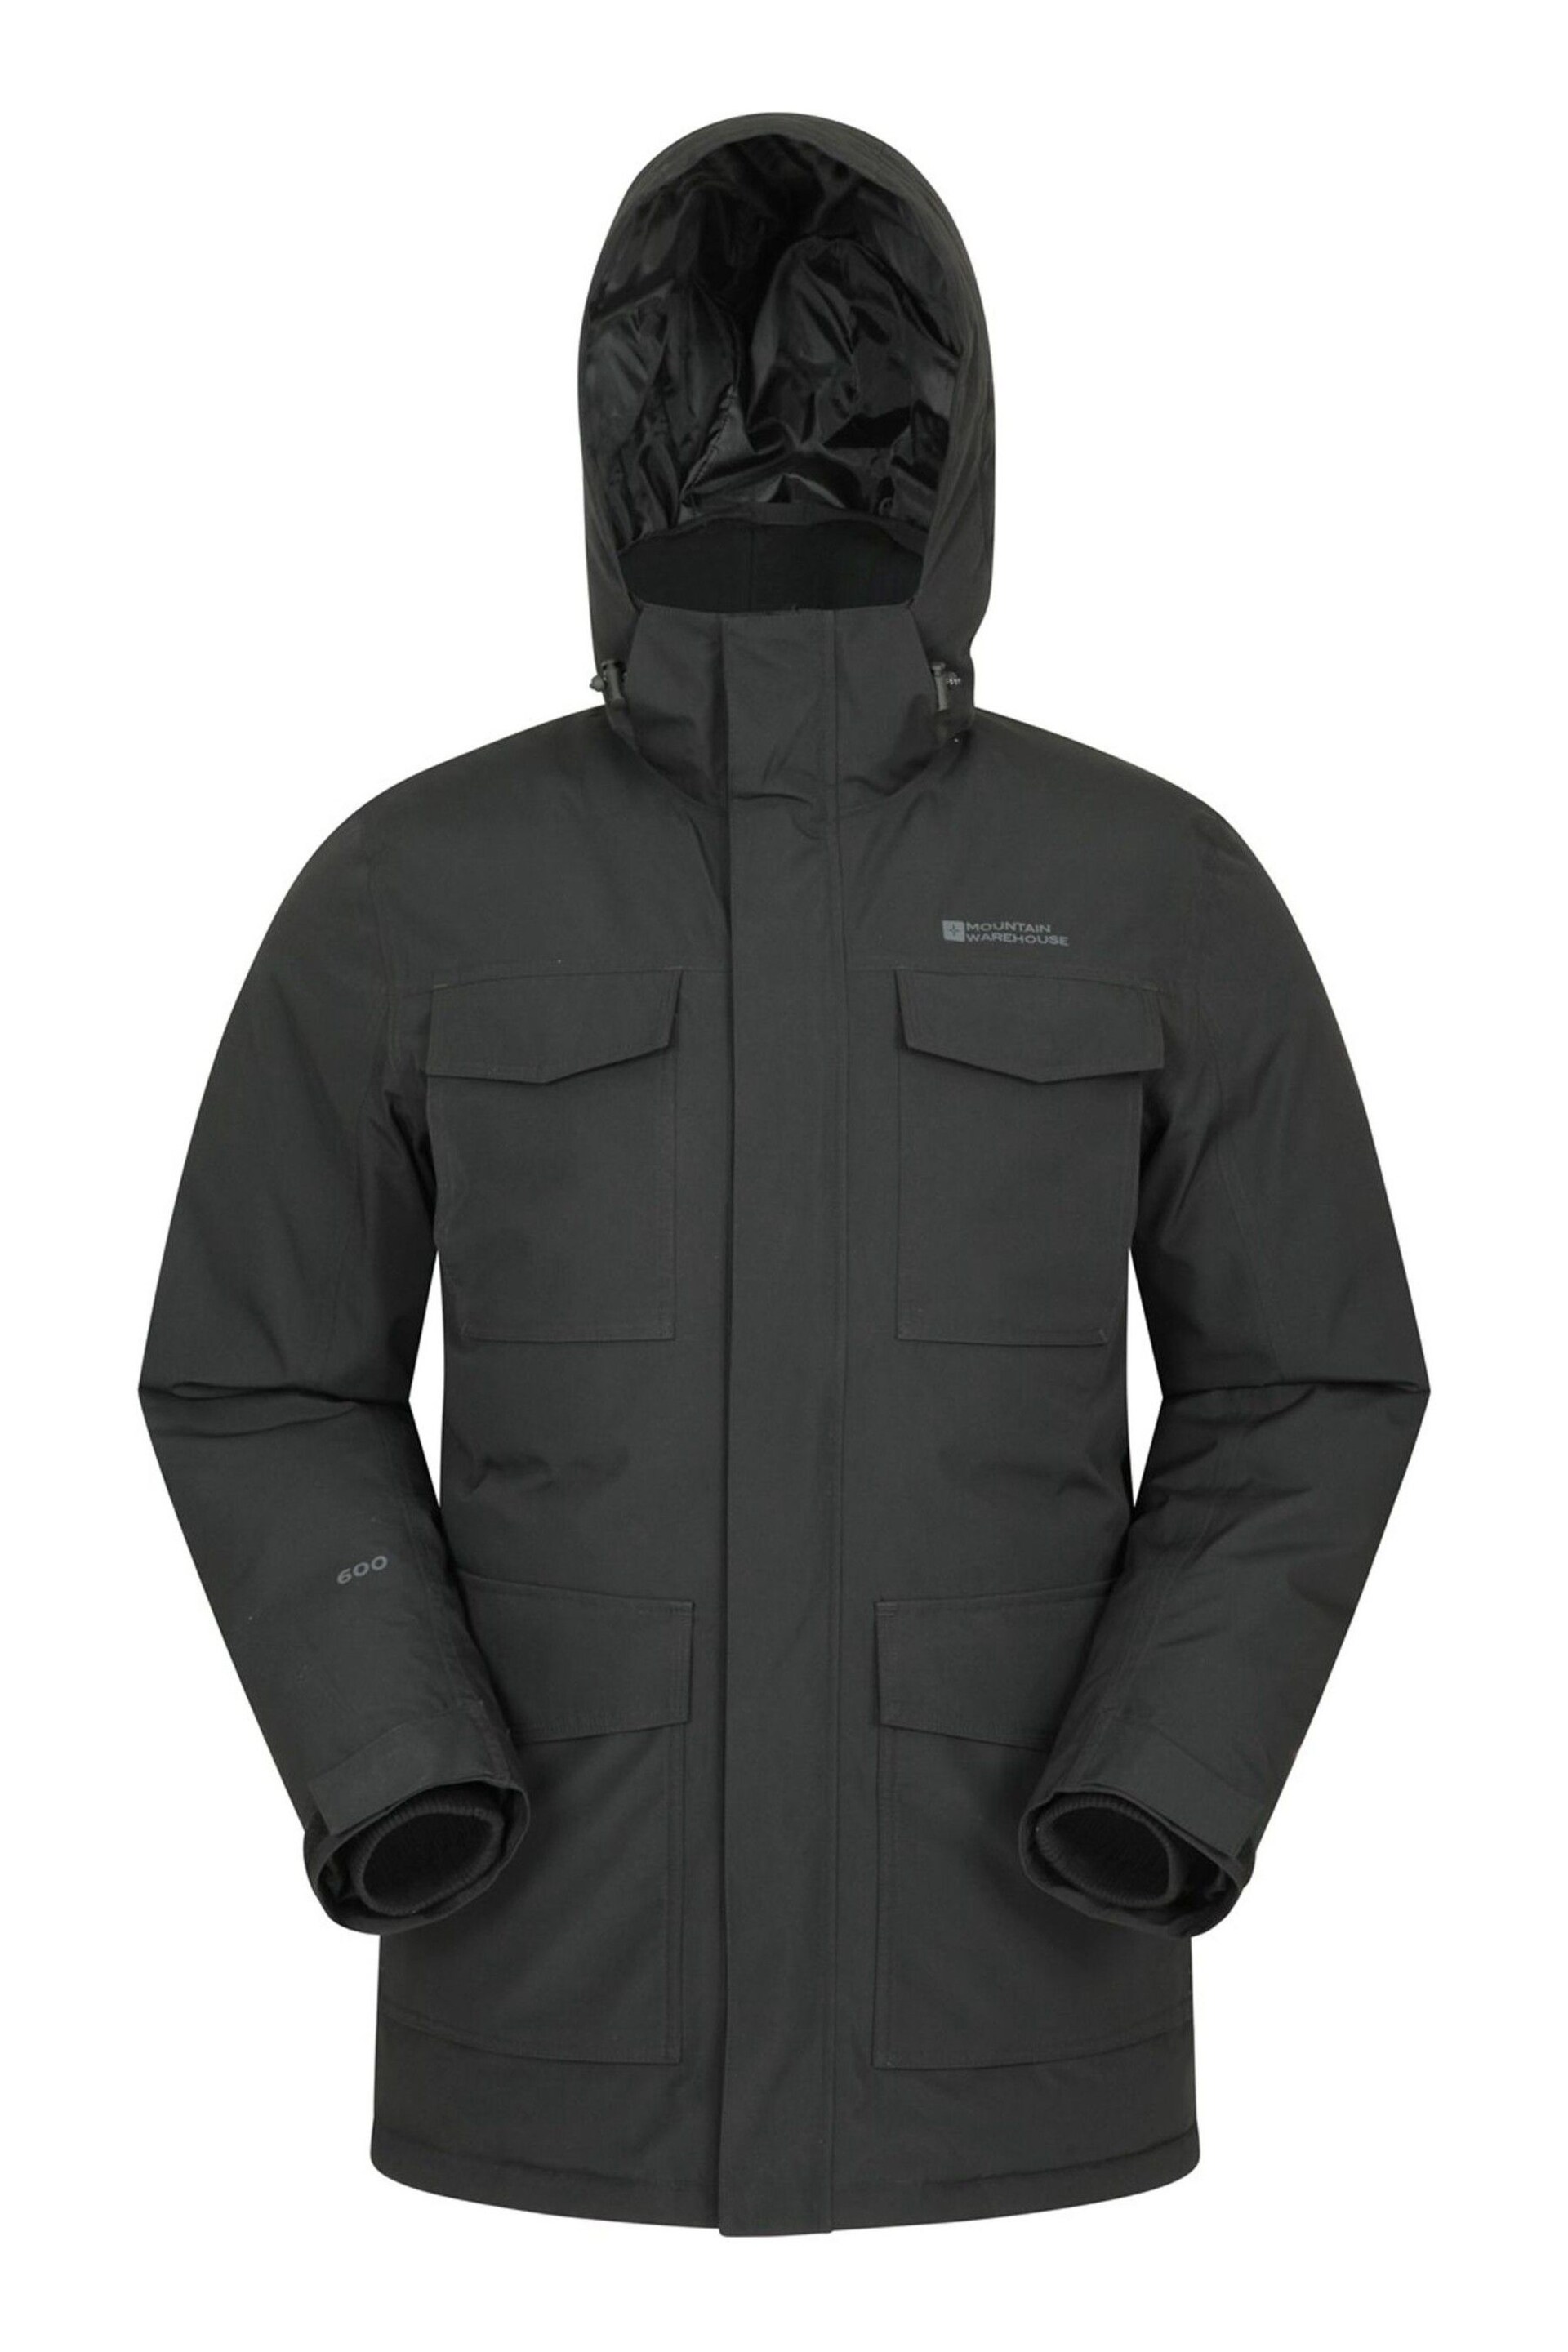 Mountain Warehouse Black Concord Waterproof Extreme Mens Down Long Jacket - Image 1 of 5